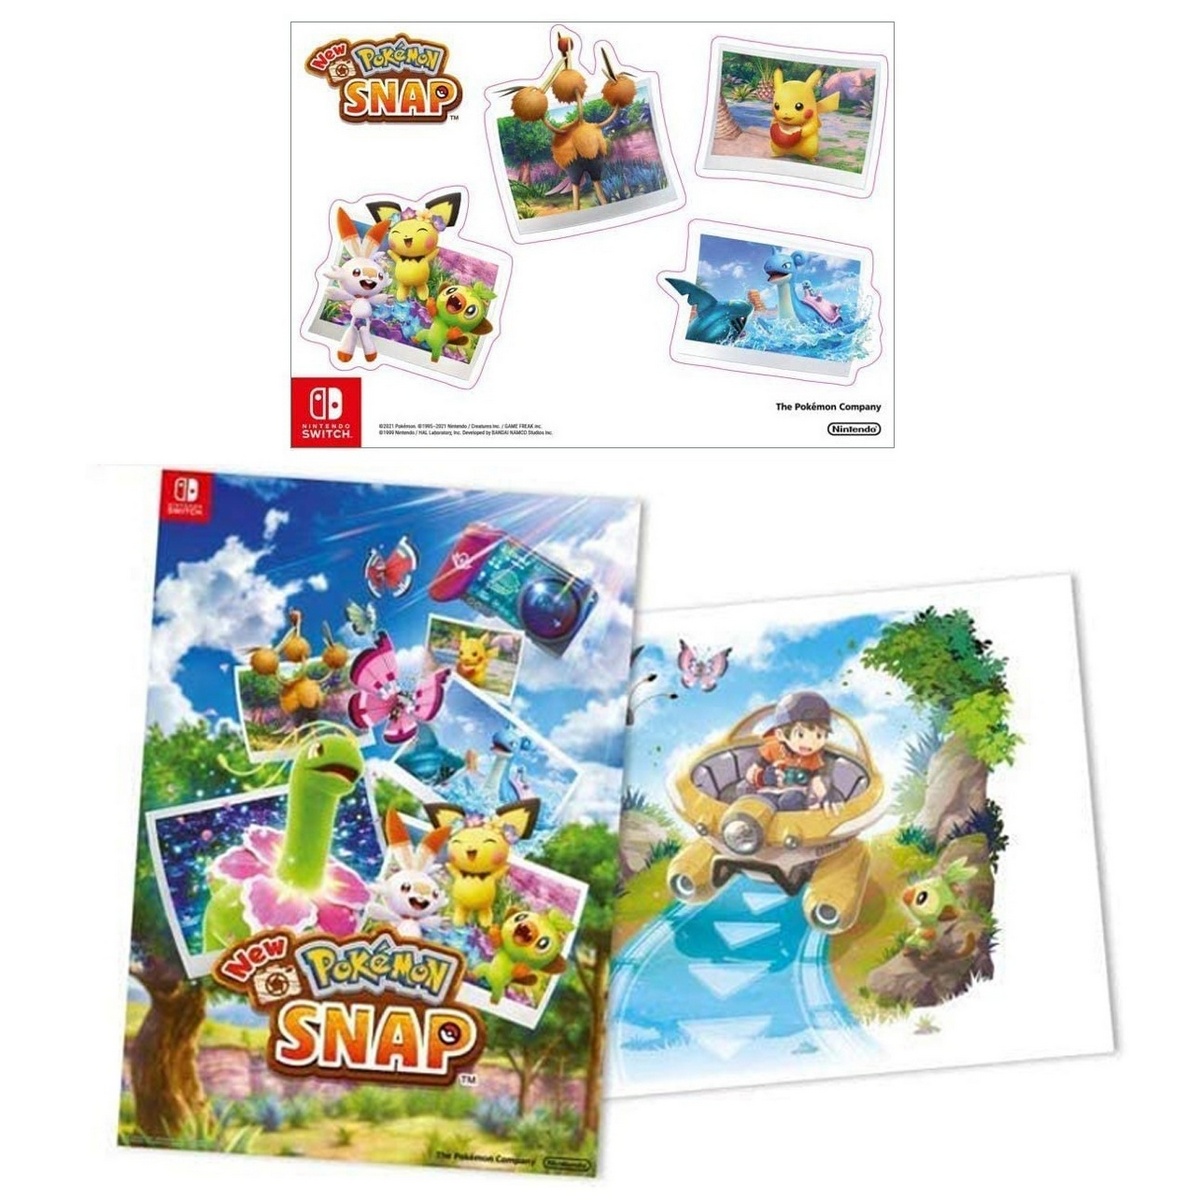 New Pokemon Snap - Sticker Sheet and Double Sided Poster (Official)